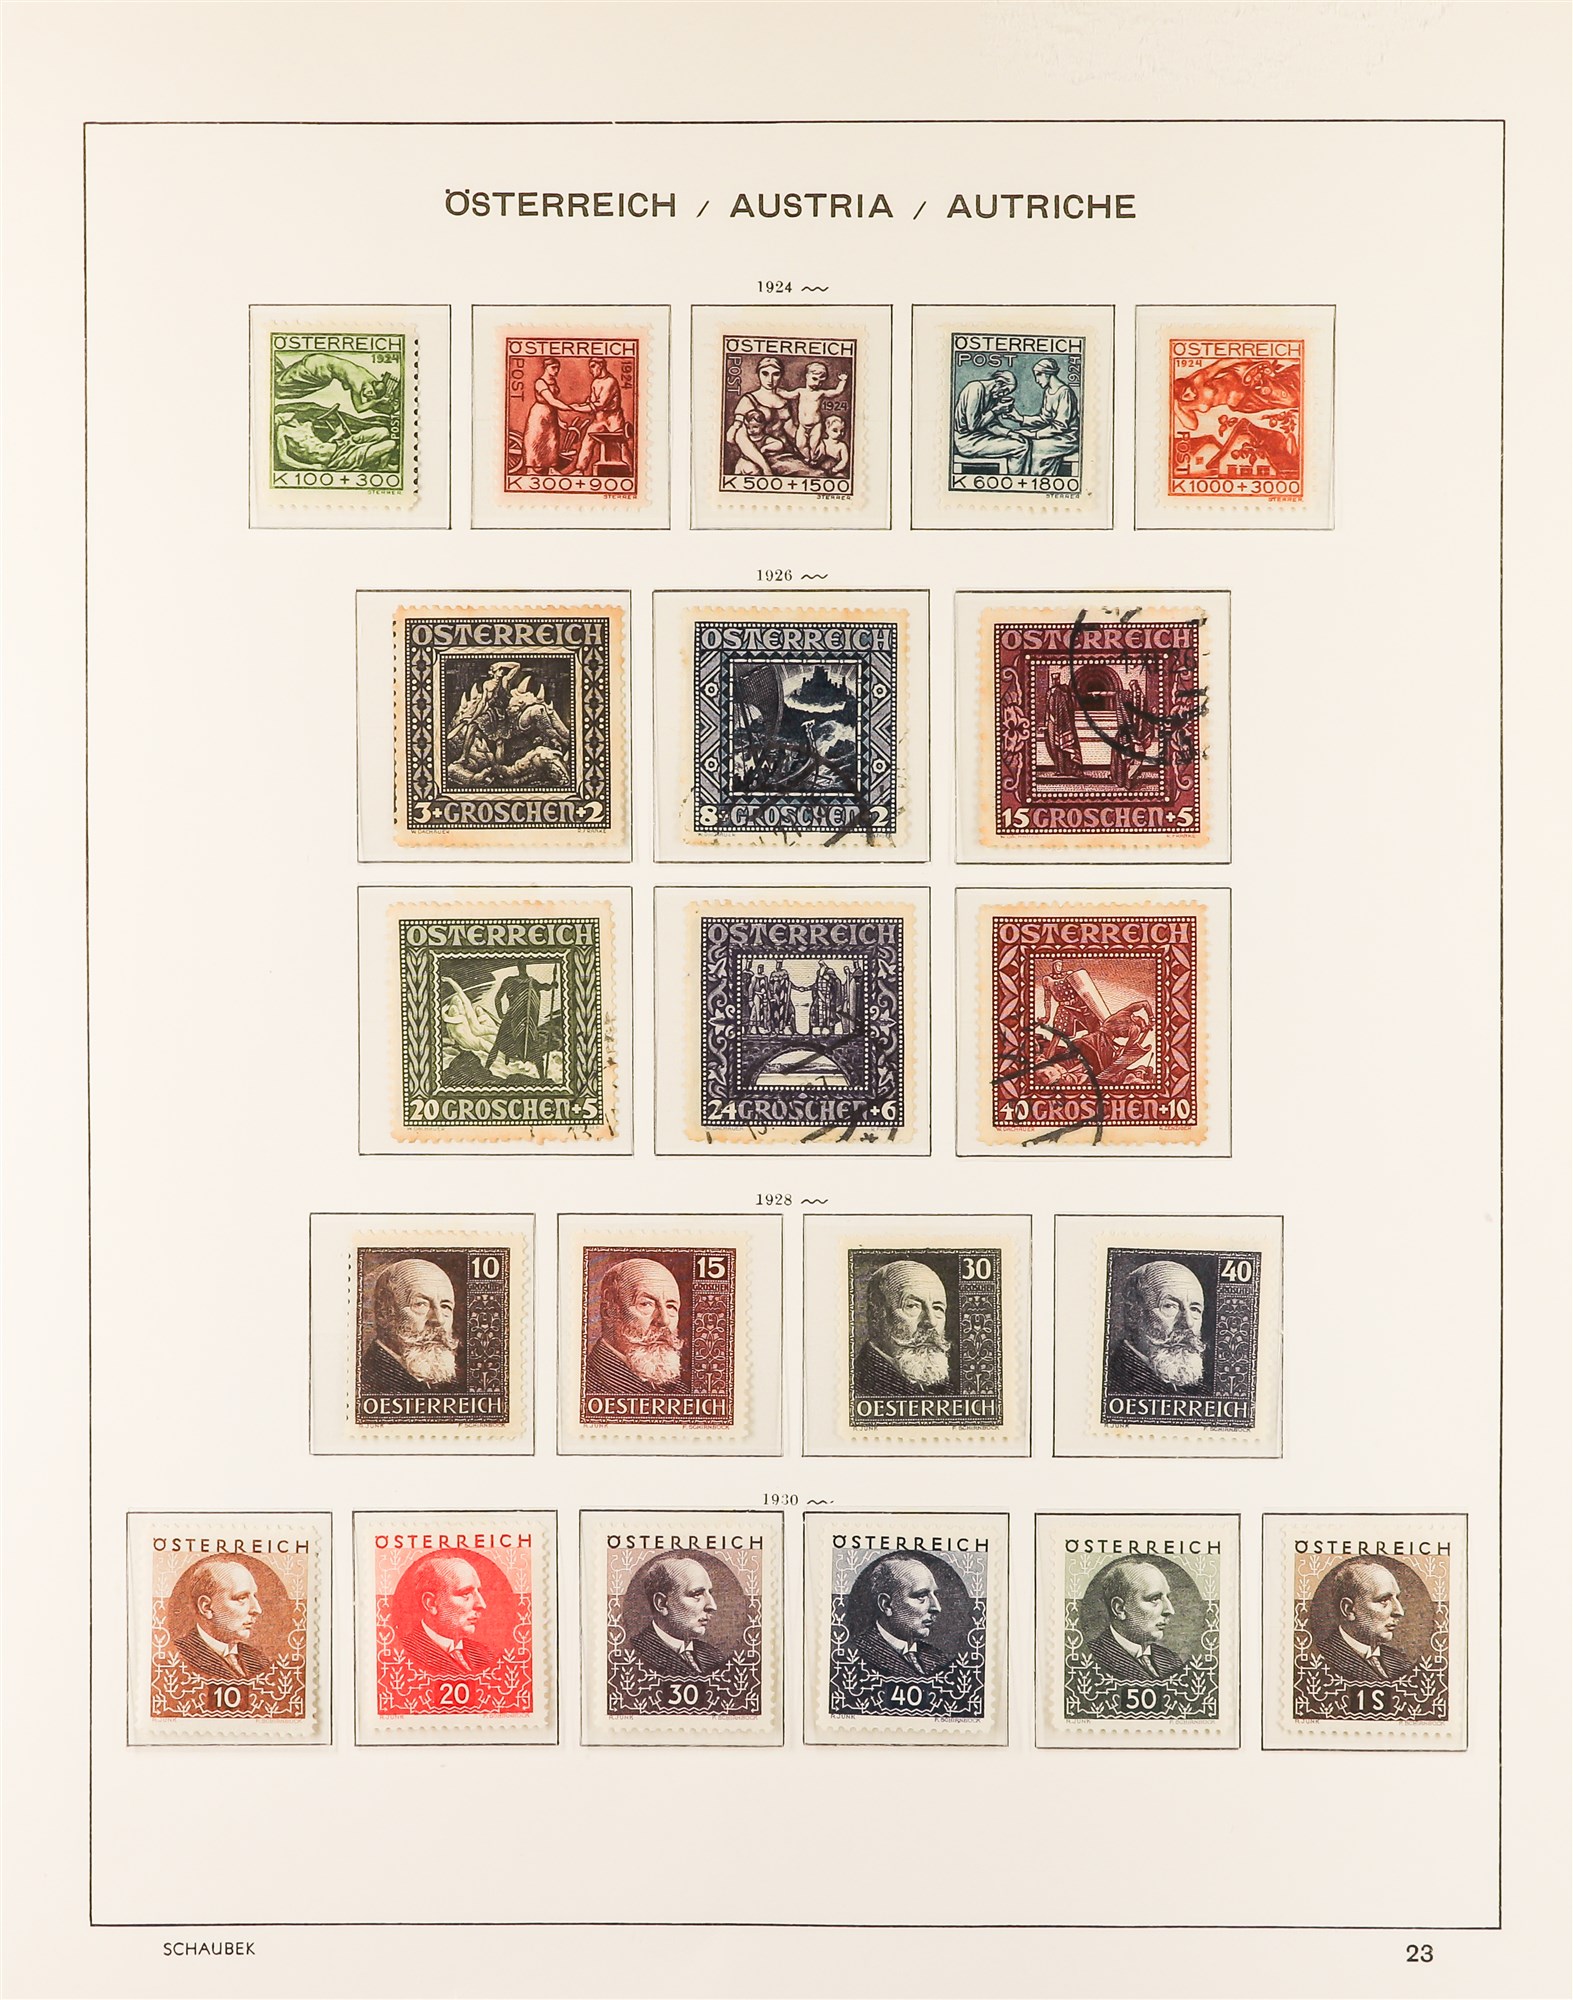 AUSTRIA 1850 - 1937 COLLECTION. of around 1000 mint & used stamps in Schaubek Austria hingeless - Image 19 of 29